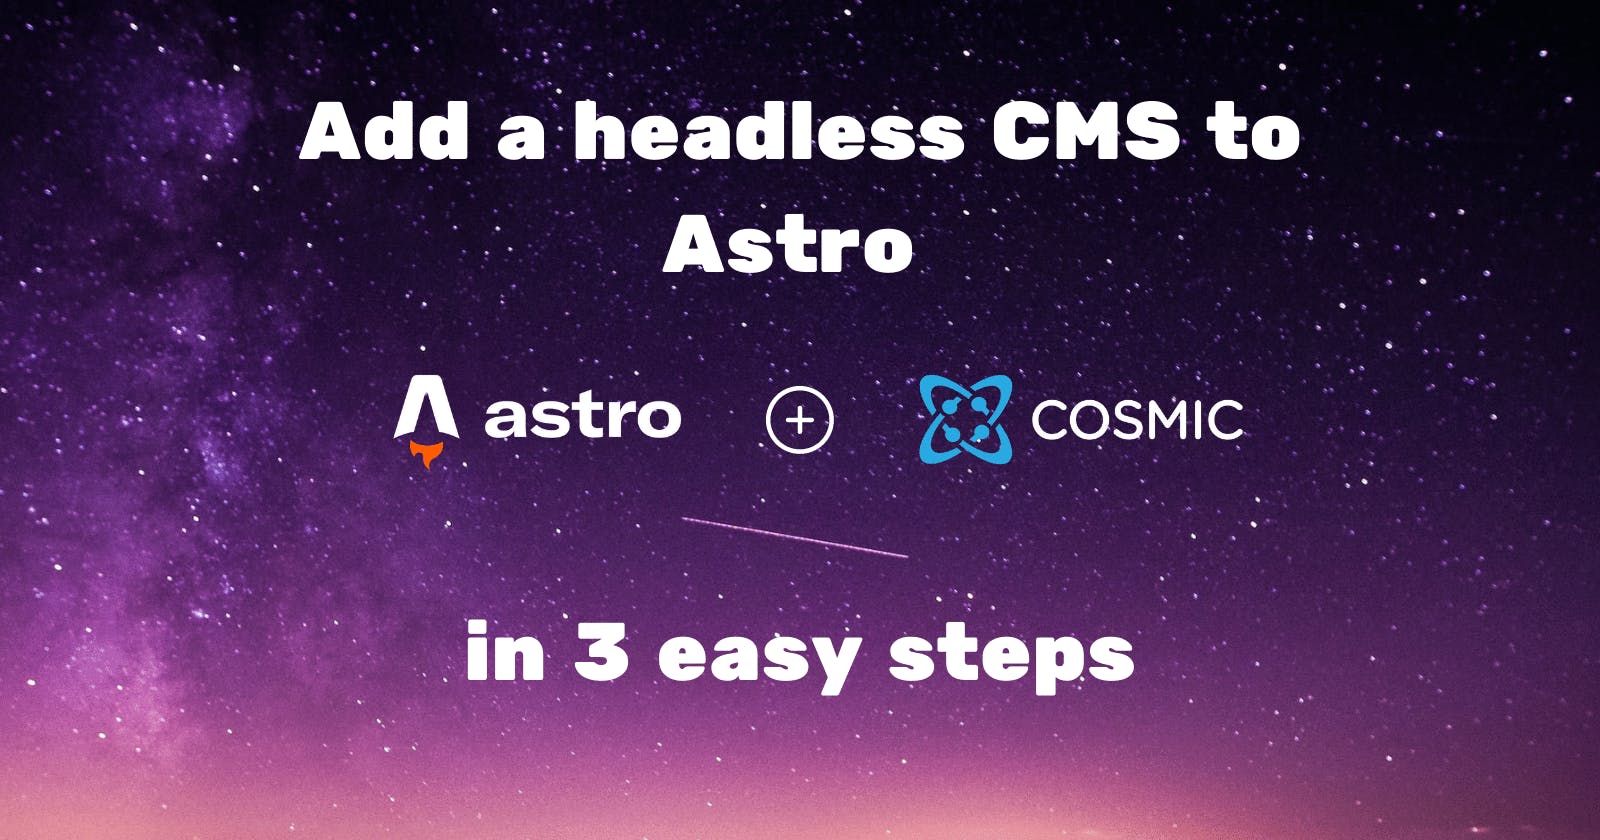 Add a headless CMS to Astro in 3 easy steps